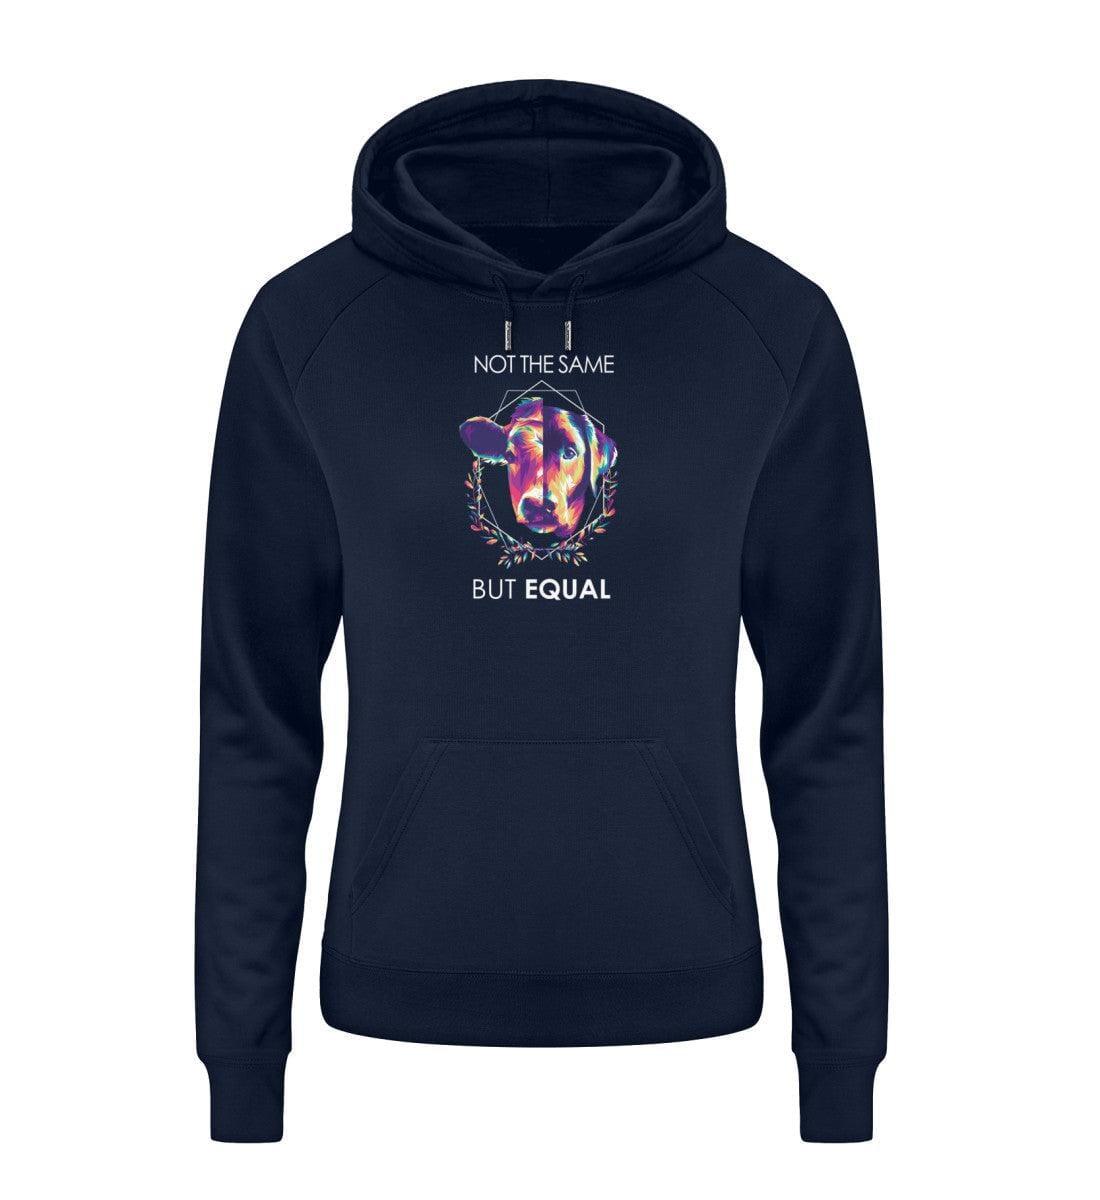 Not the same but equal x Until all are free (beidseitig) - Damen Premium Hoodie Trigger Hoodie ST/ST Shirtee French Navy S 